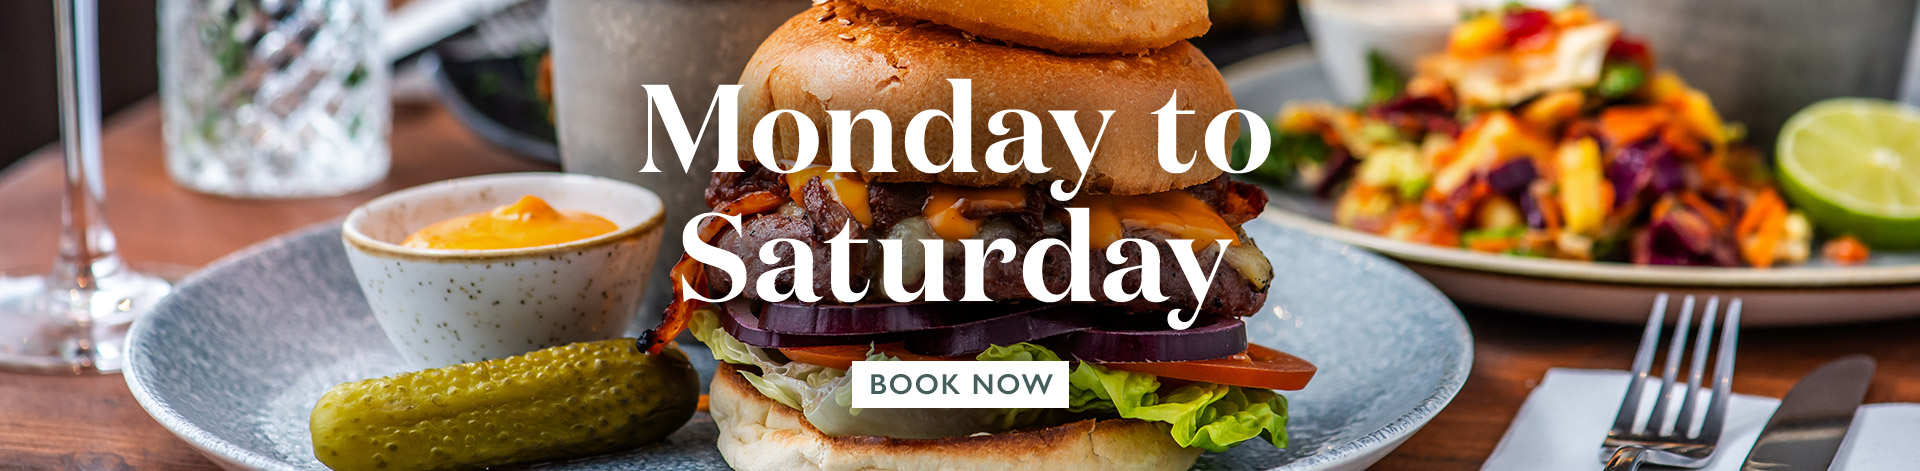 Book now at The Oystercatcher